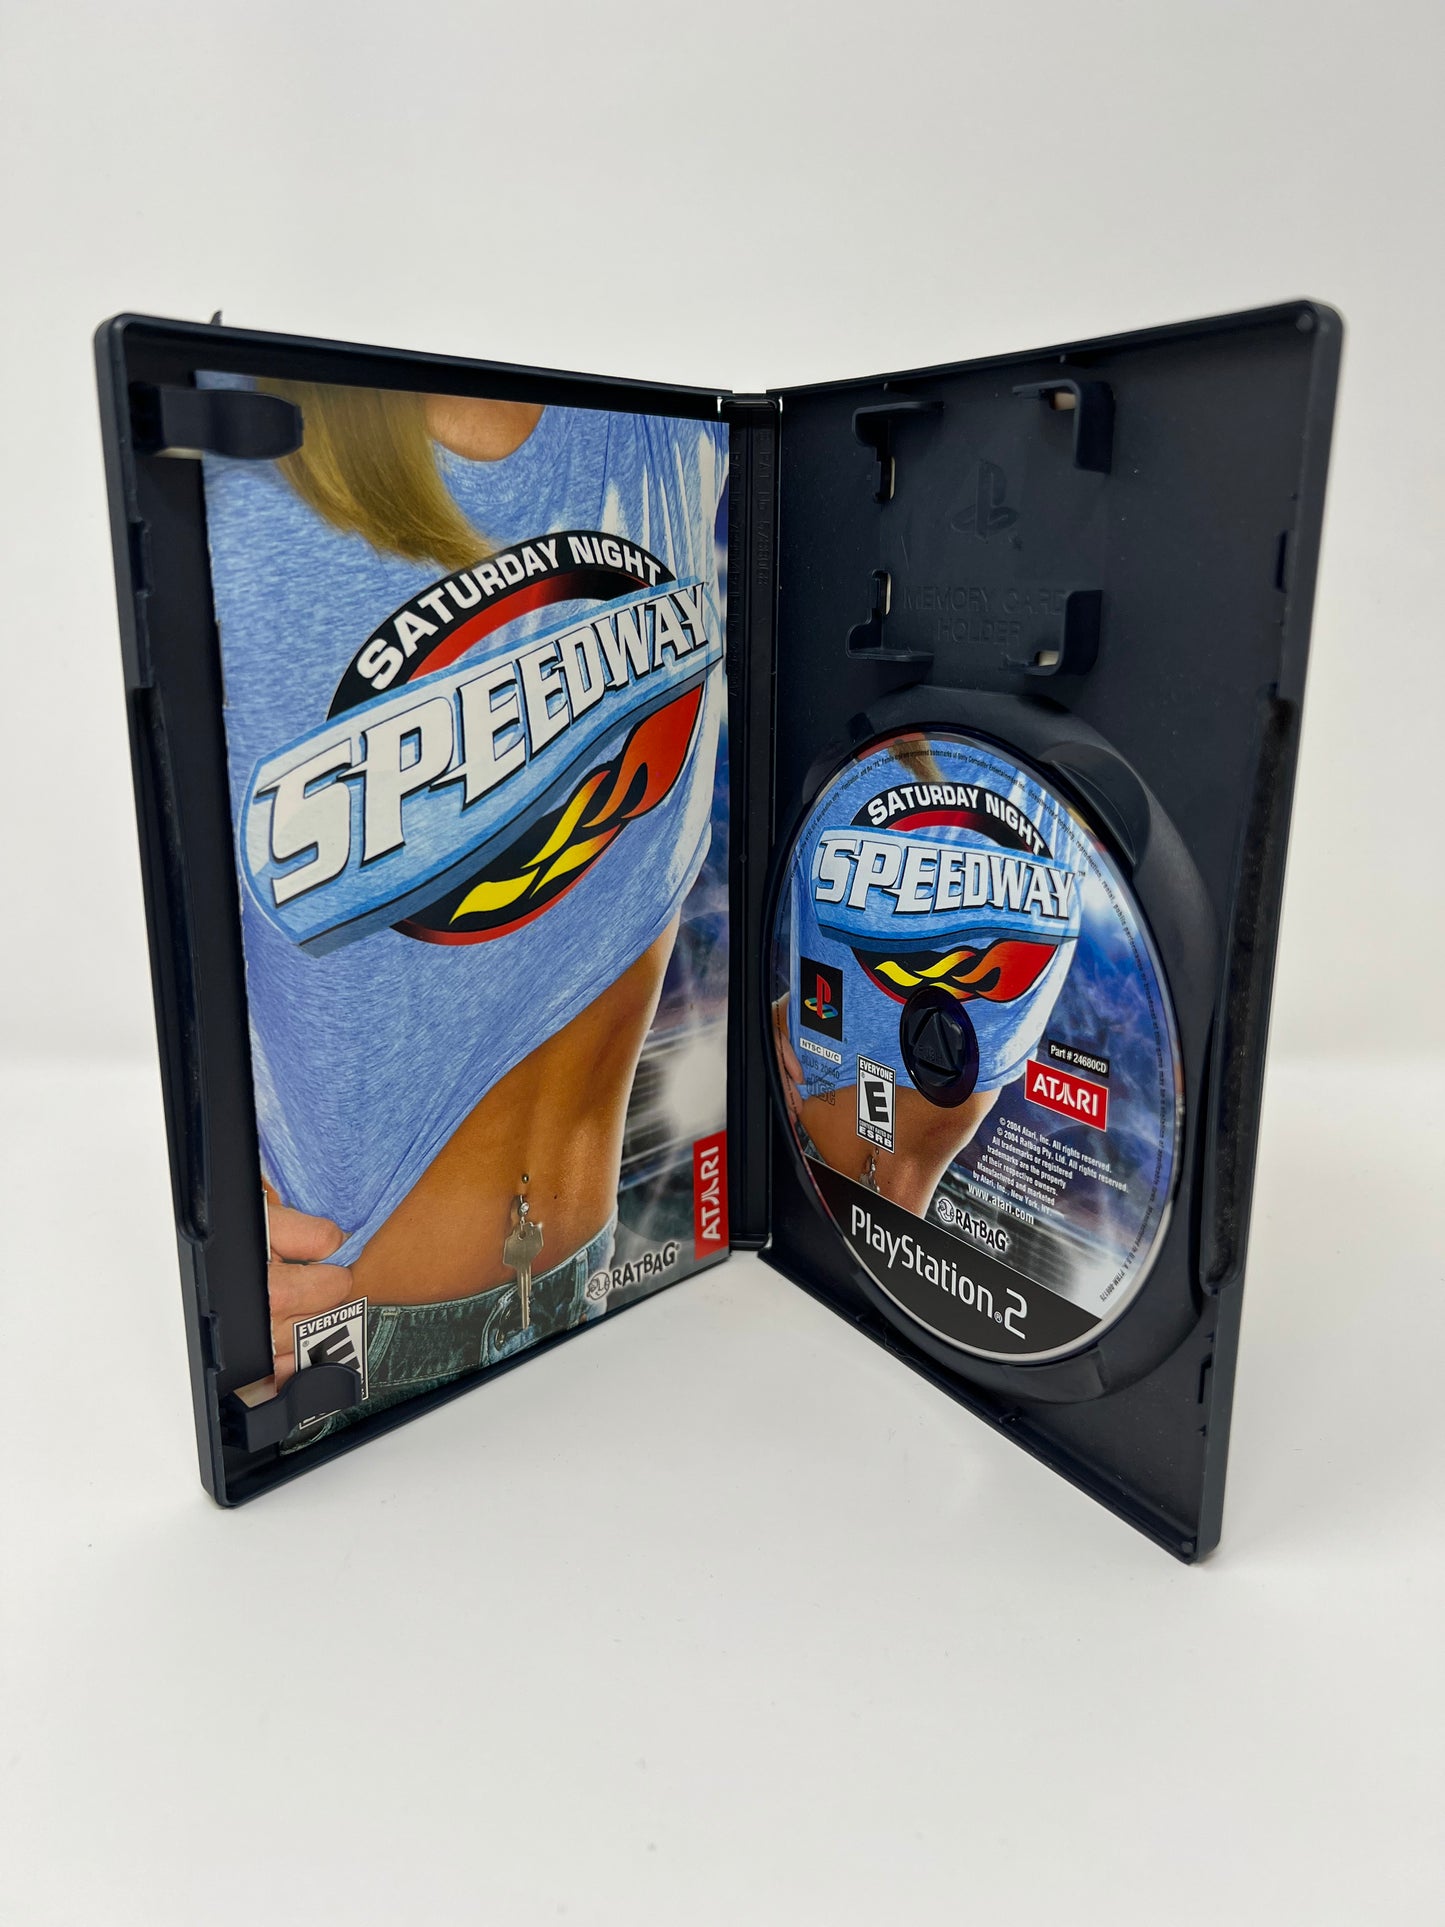 Saturday Night Speedway - PS2 Game - Used